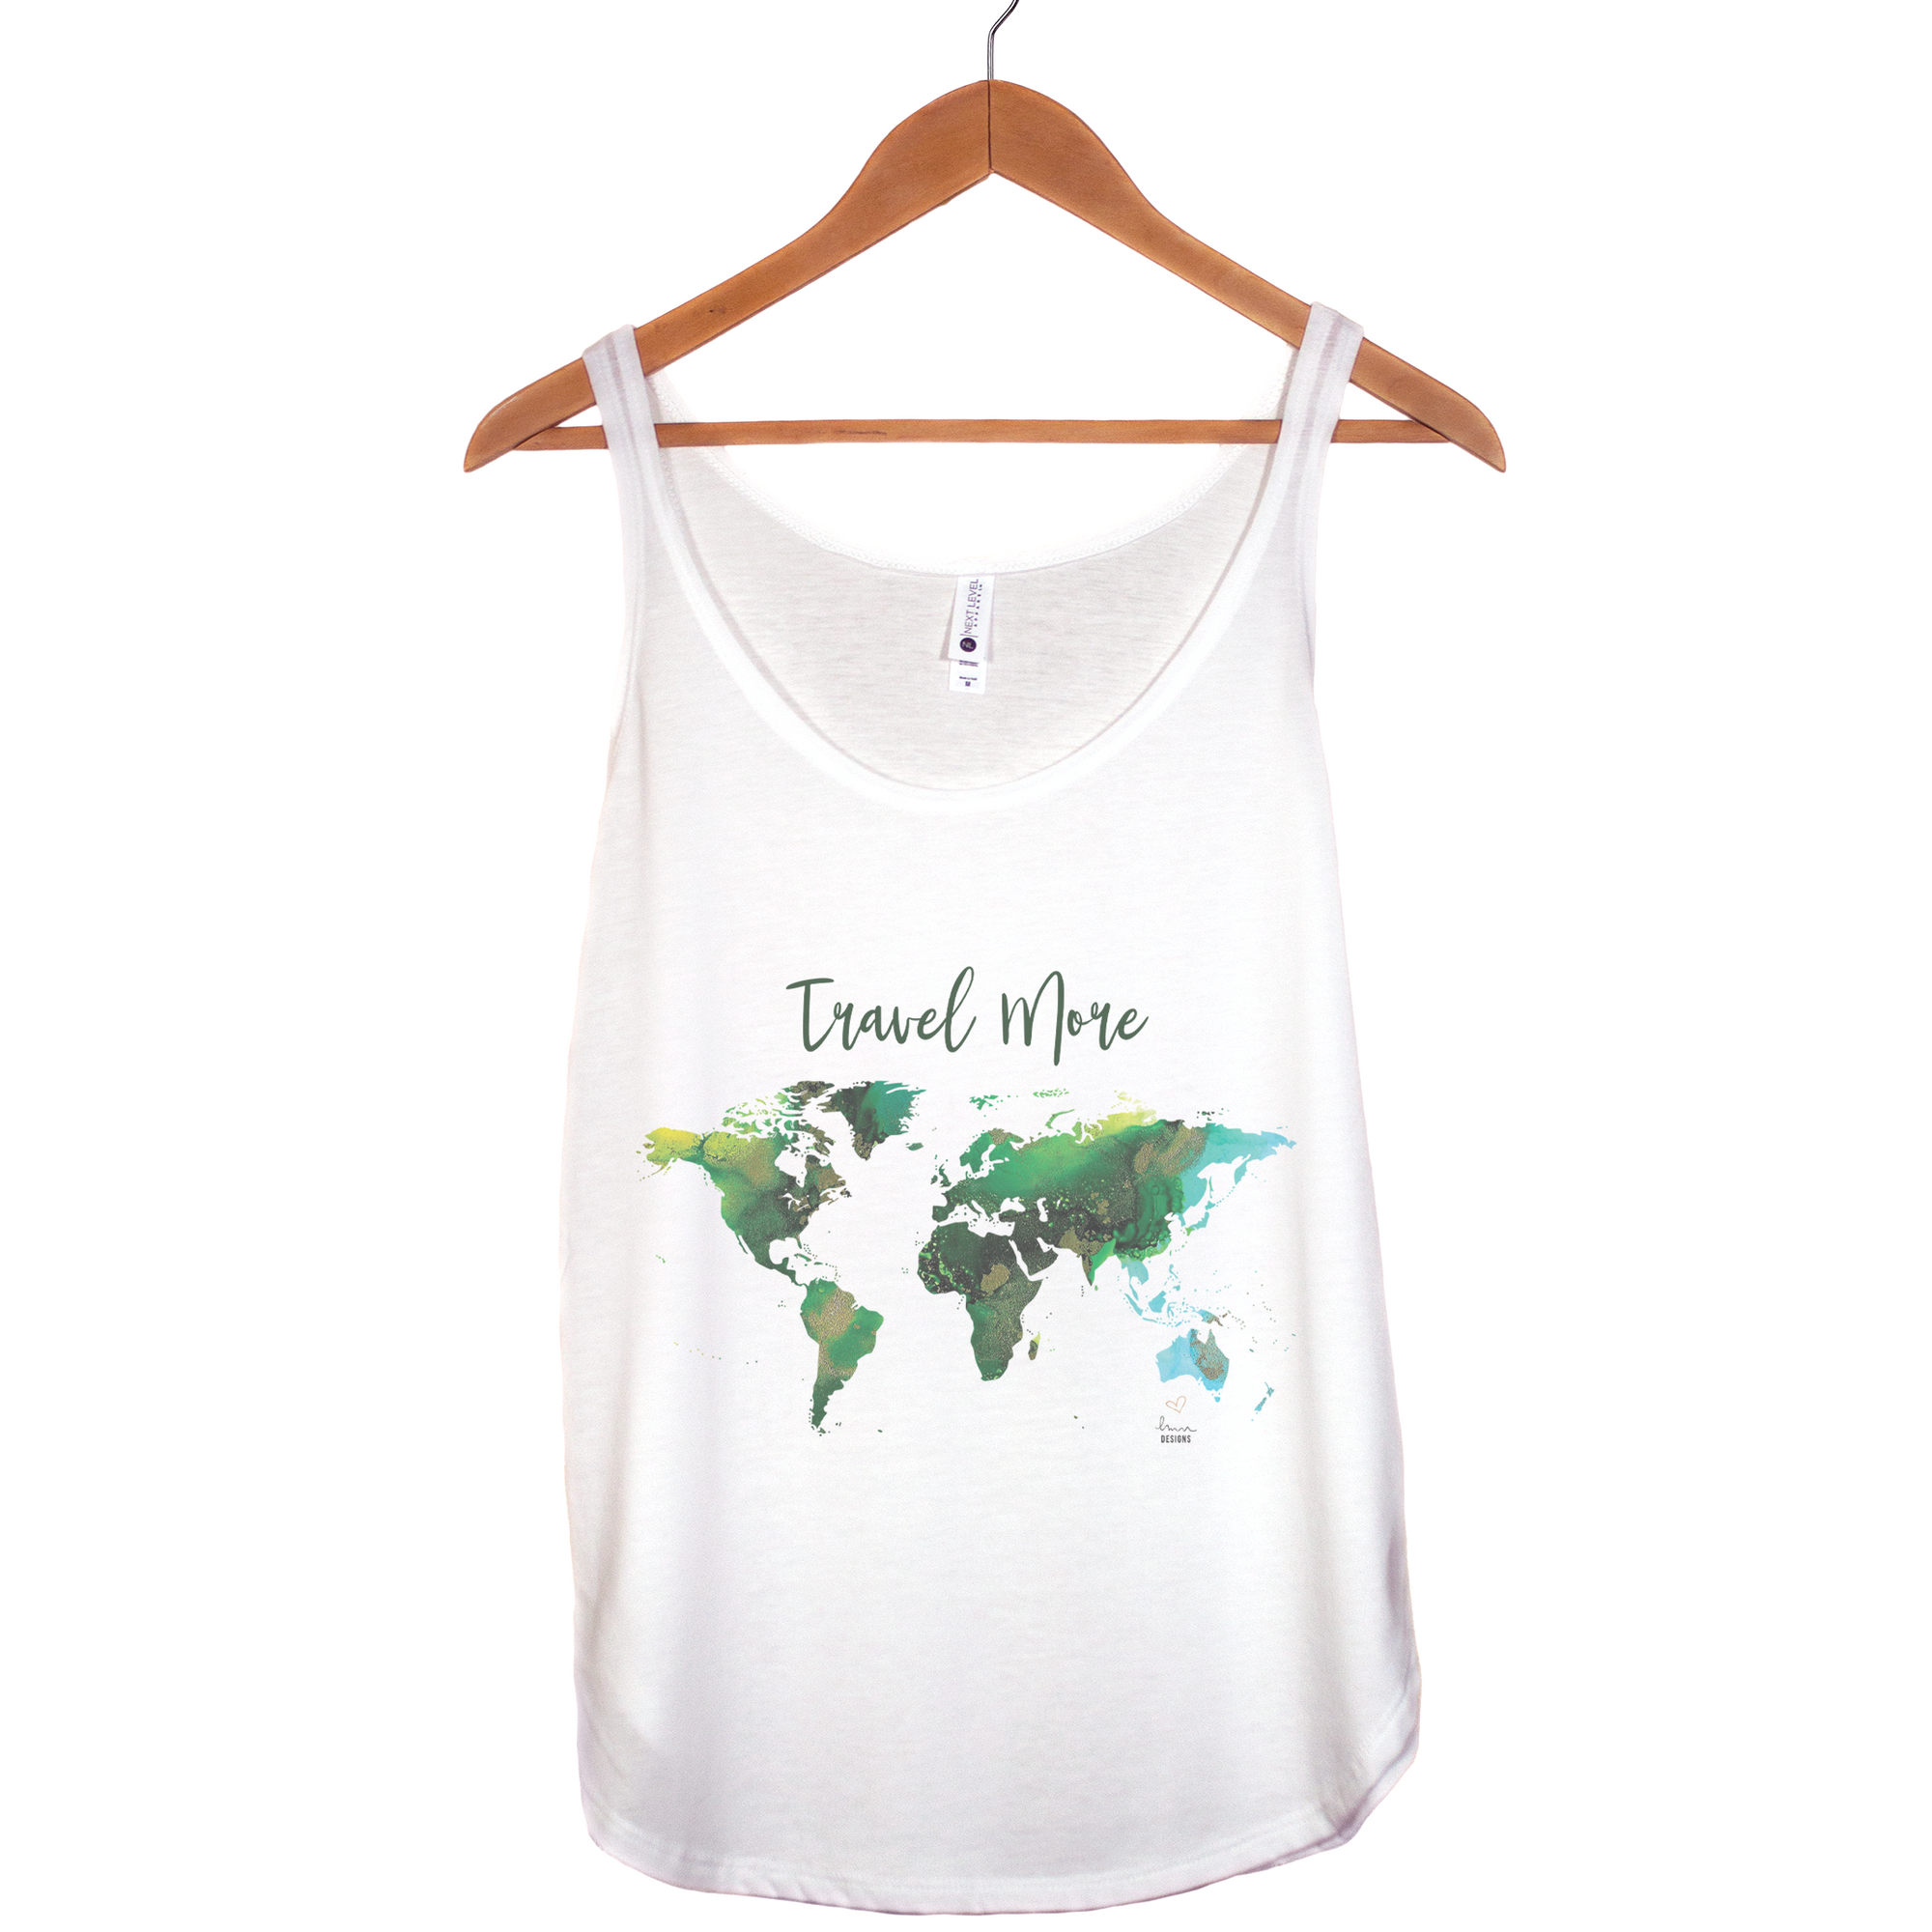 Travel More Ink Map - White Triblend Tank